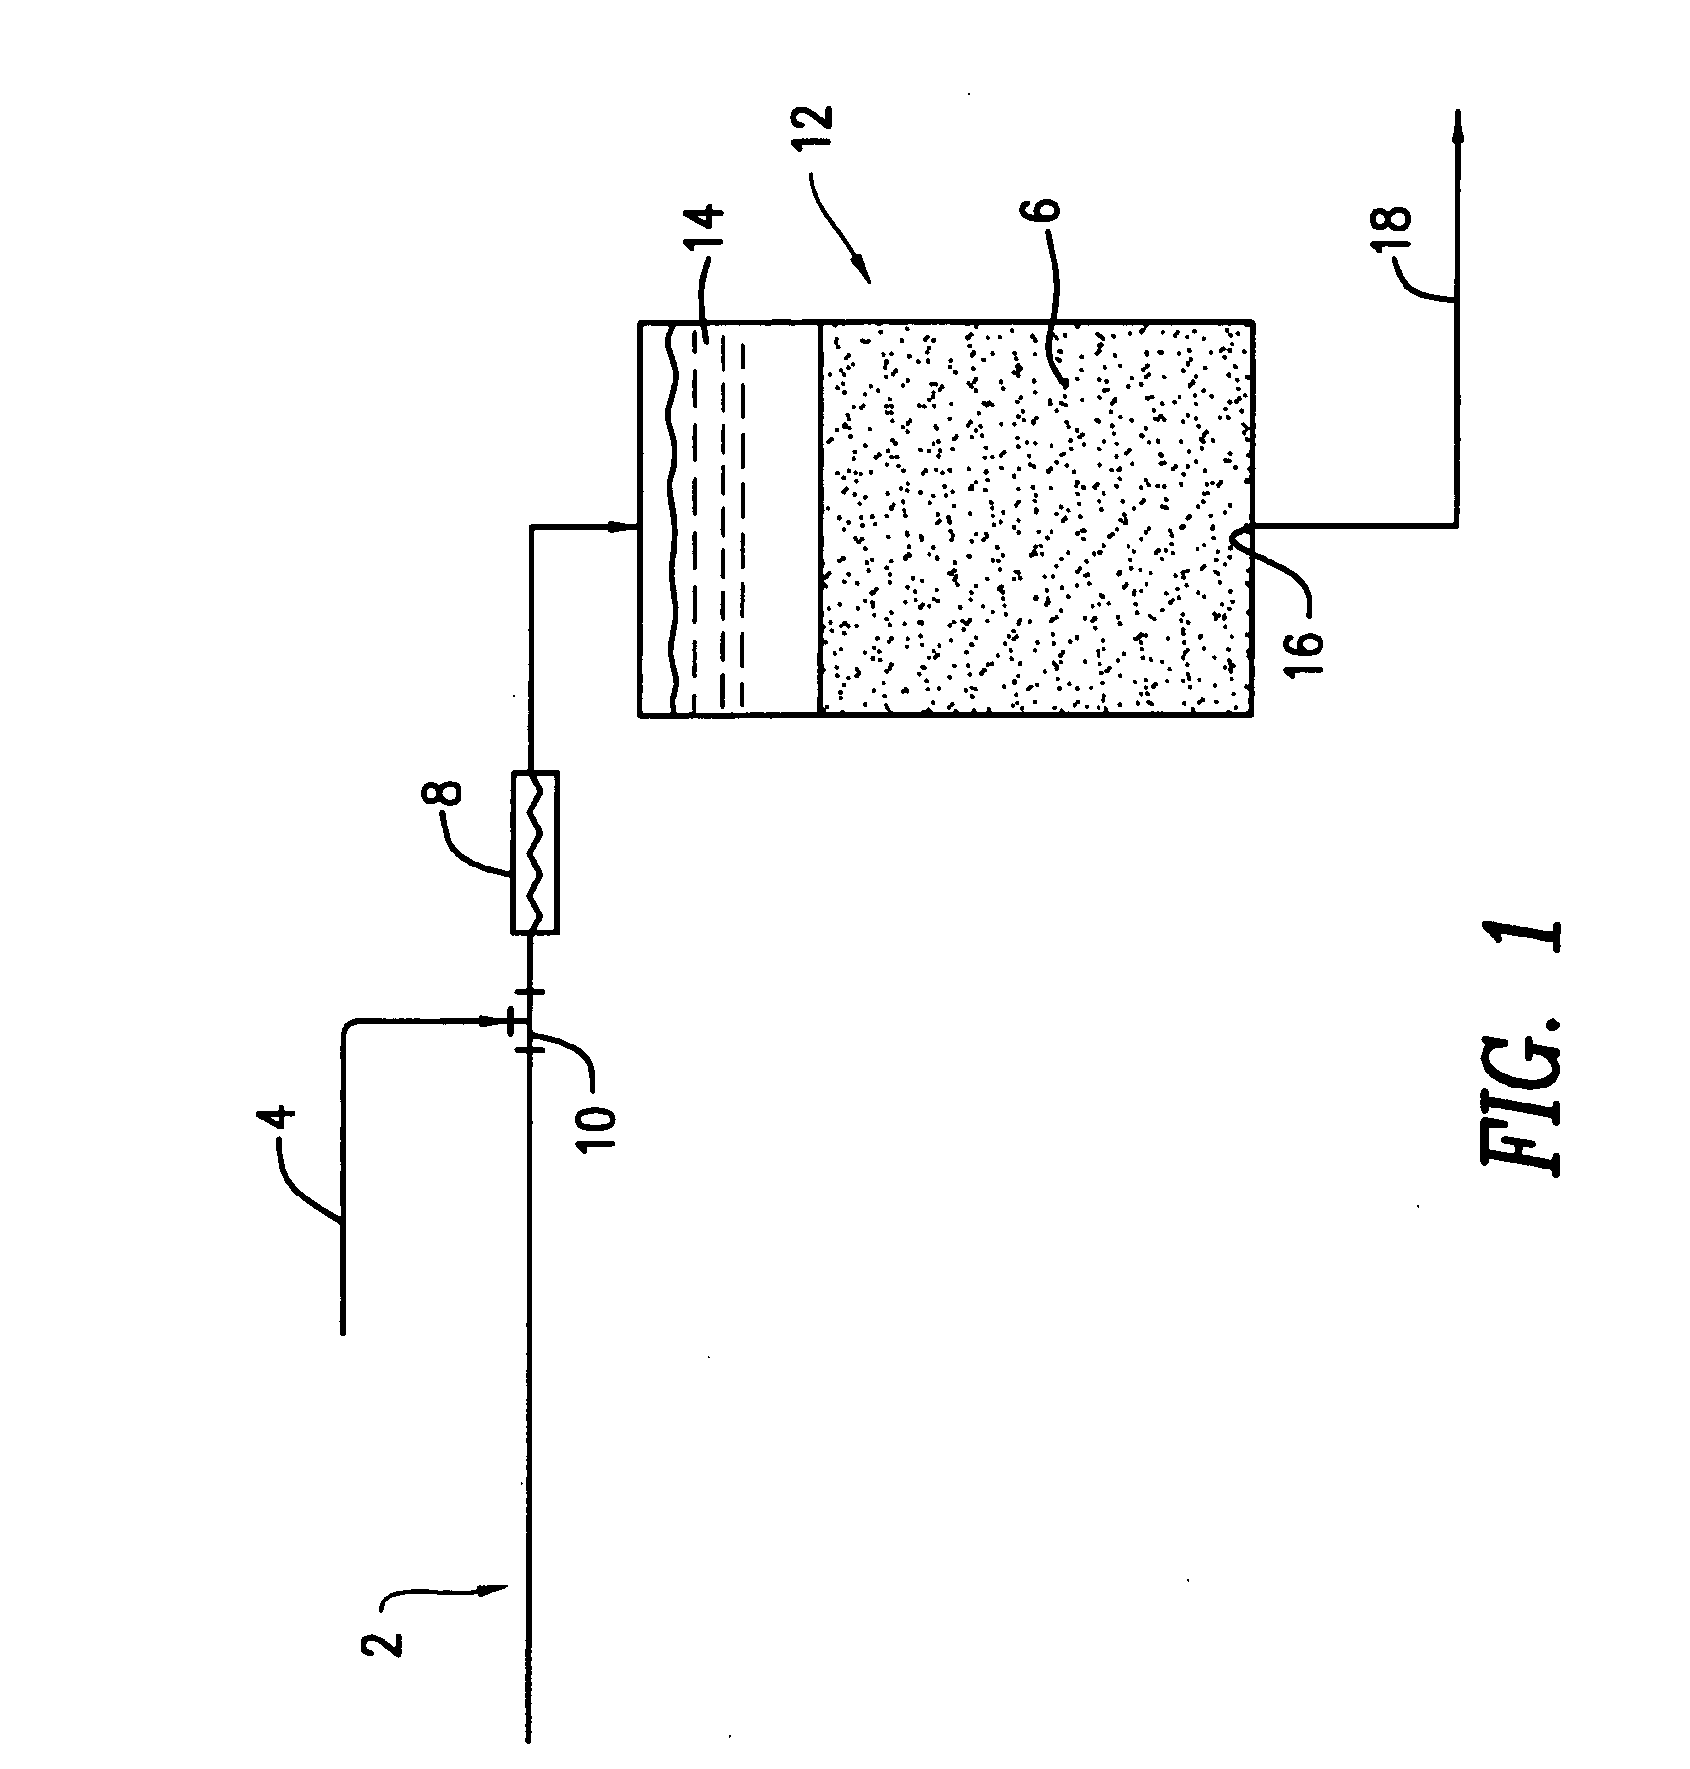 Apparatus and method for water treatment by a direct co-precipitation/filtration process